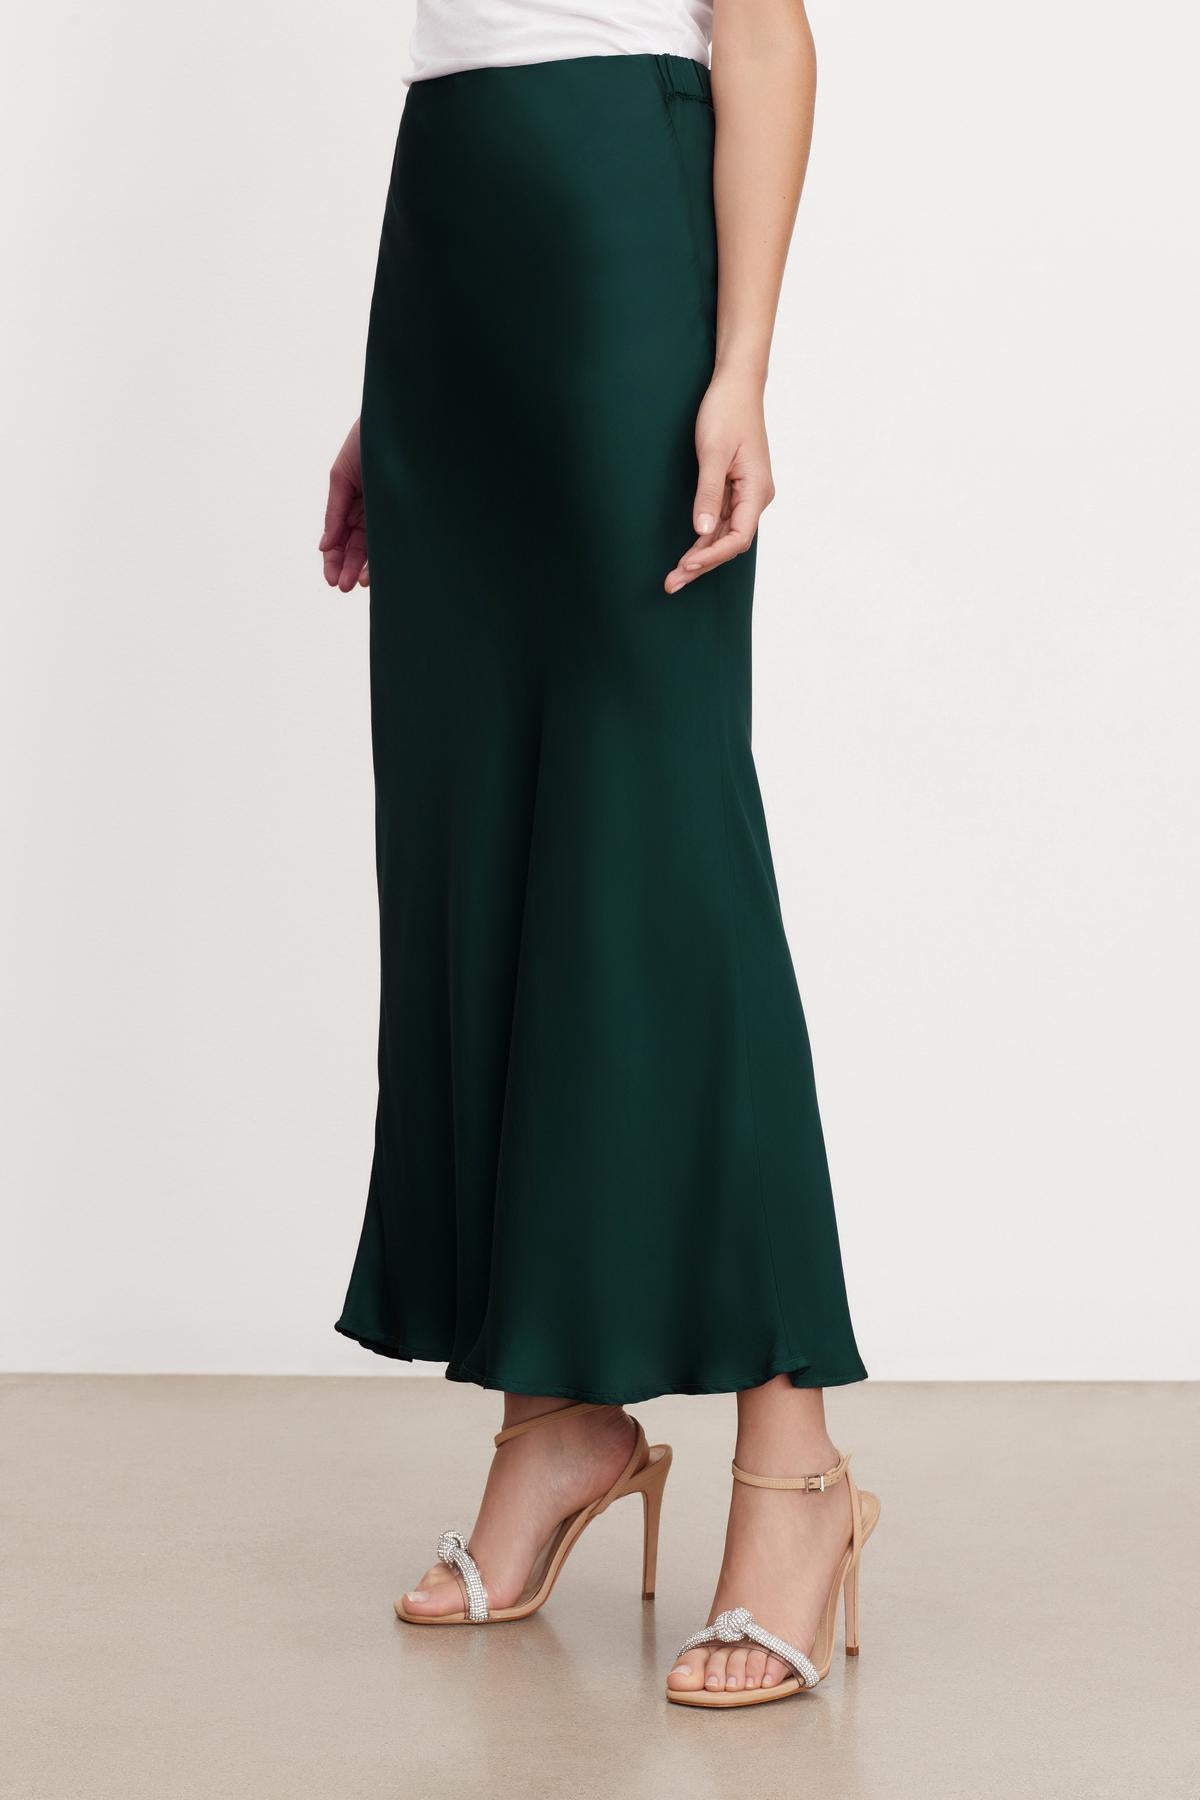 A woman wearing a flattering fit Velvet by Graham & Spencer green satin CADENCE SATIN MAXI SKIRT made of viscose fabric.-35654454771905